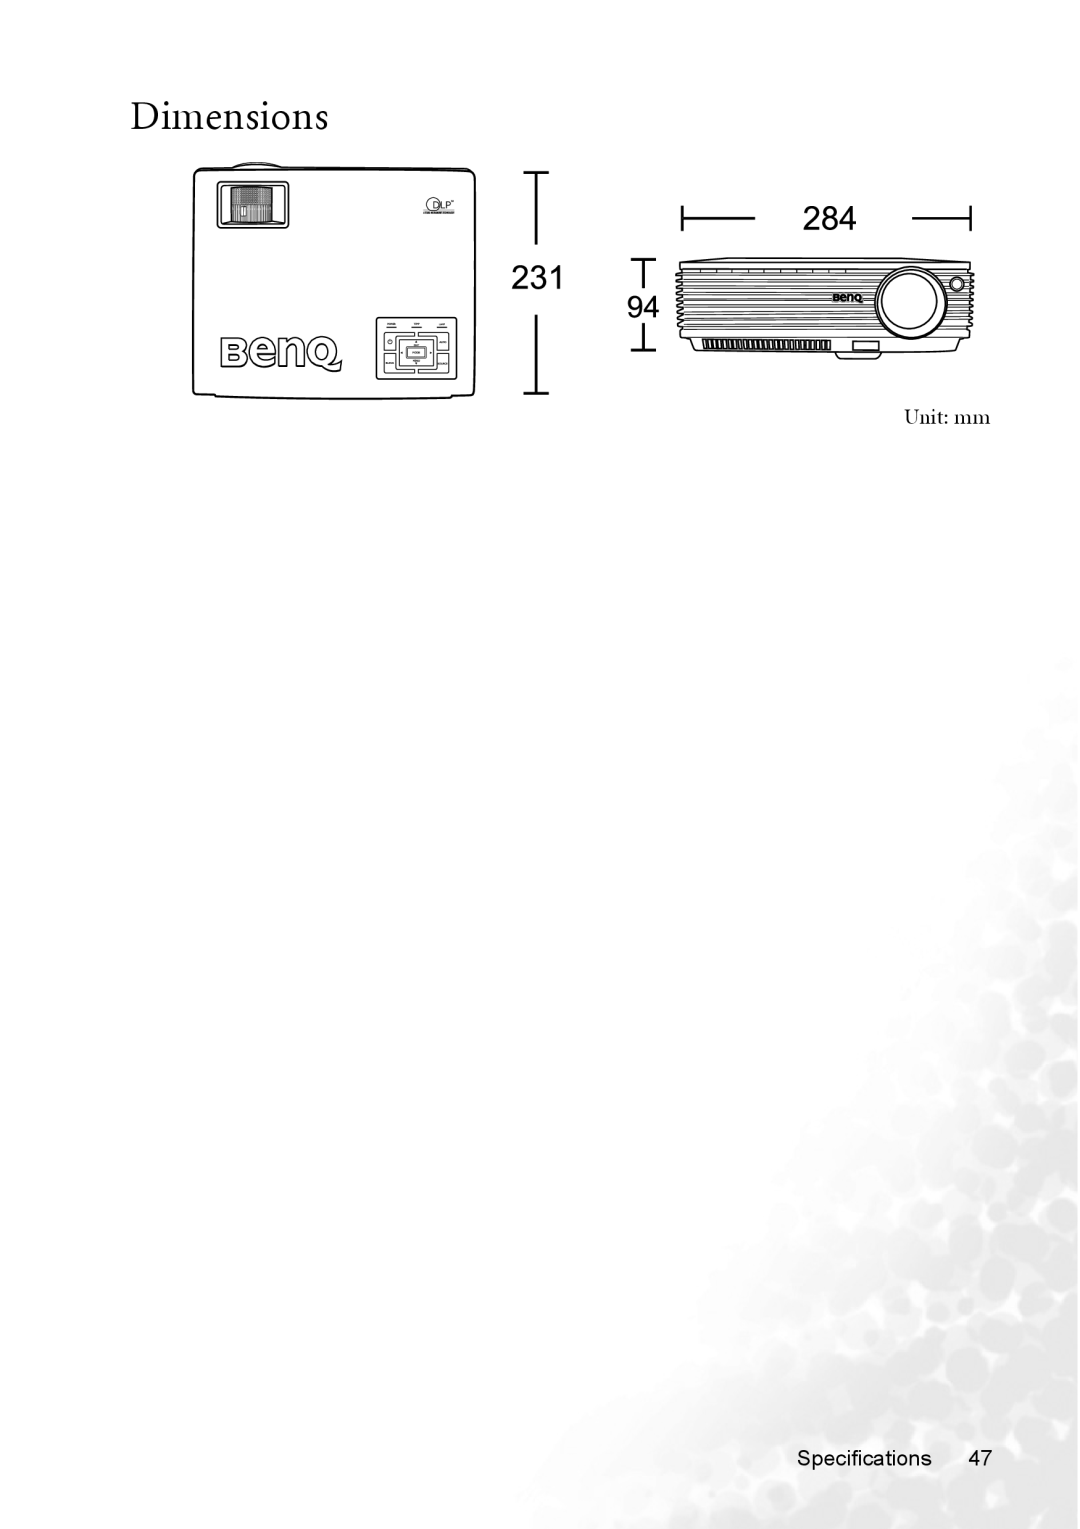 BenQ MP620p user manual Dimensions, Unit mm, Specifications 